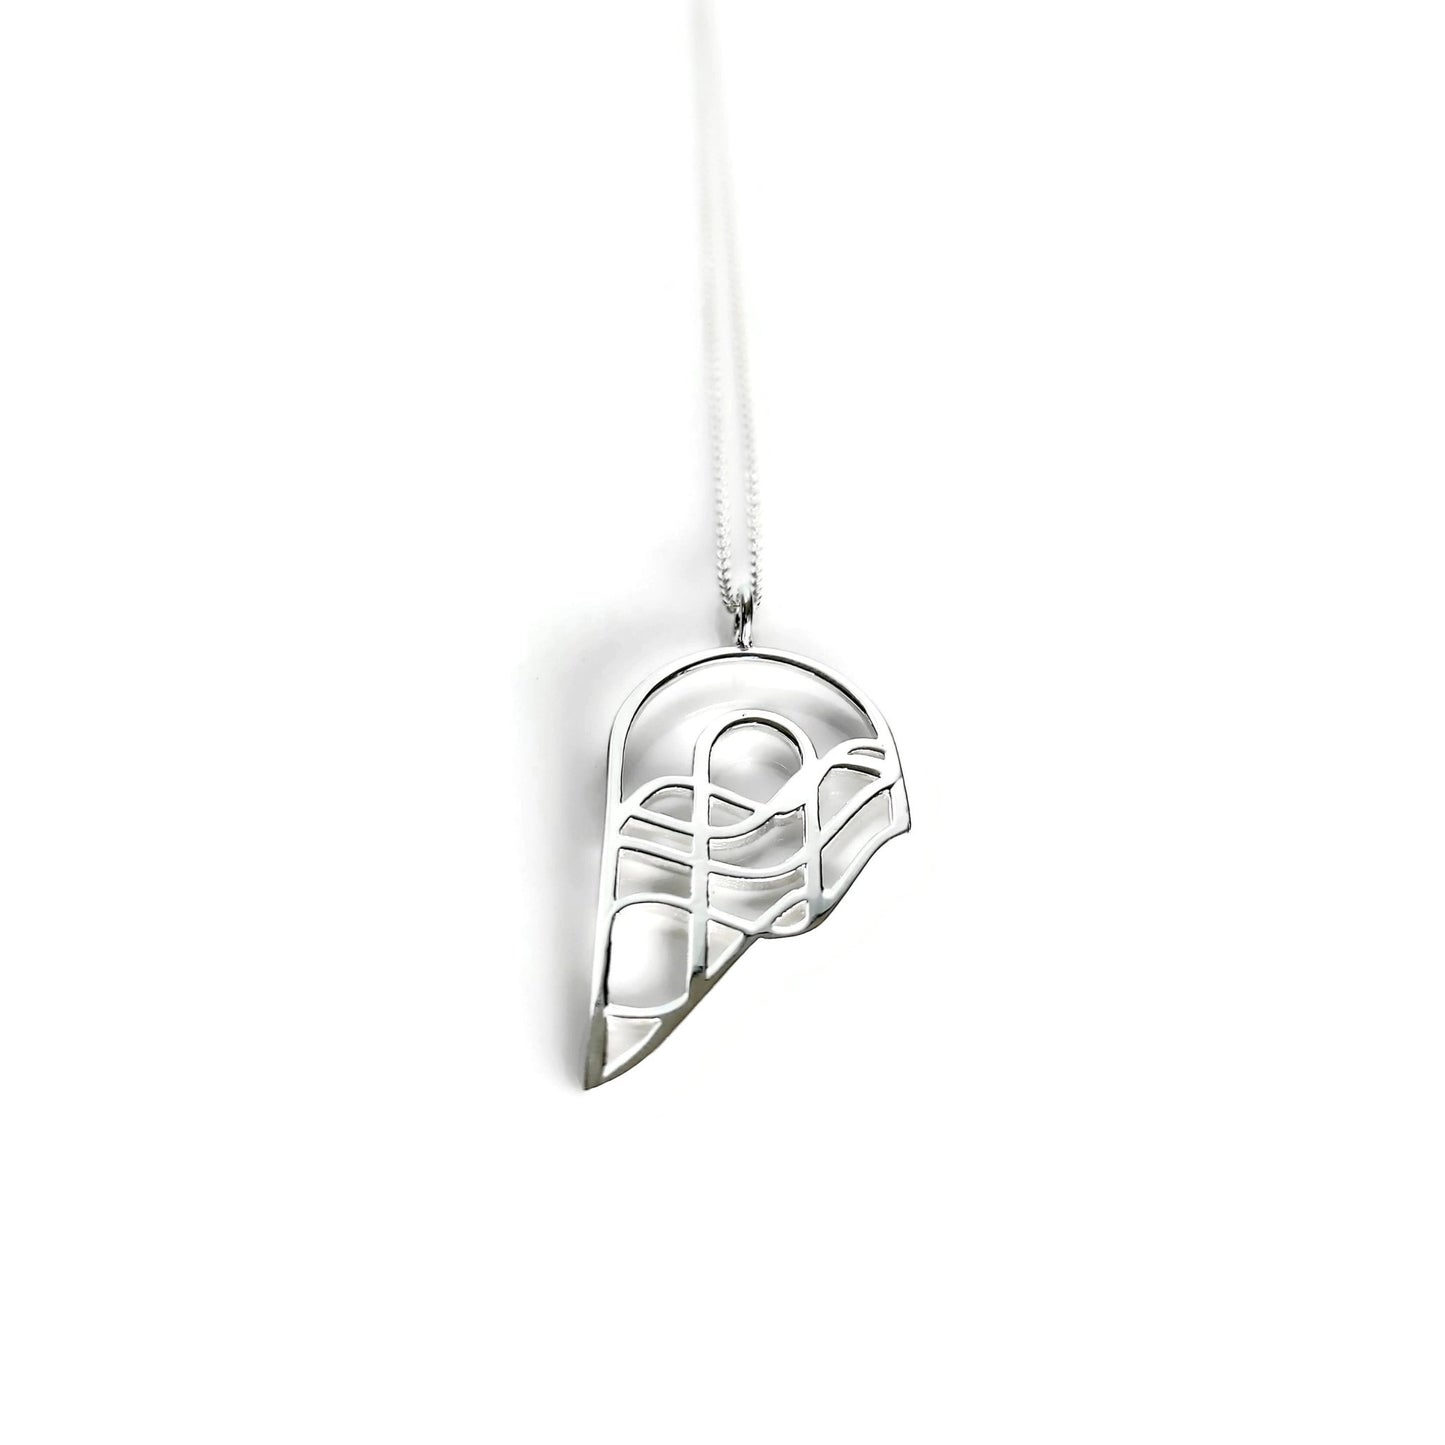 half-heart-wing-design-pendant-necklace-with-silver-chain